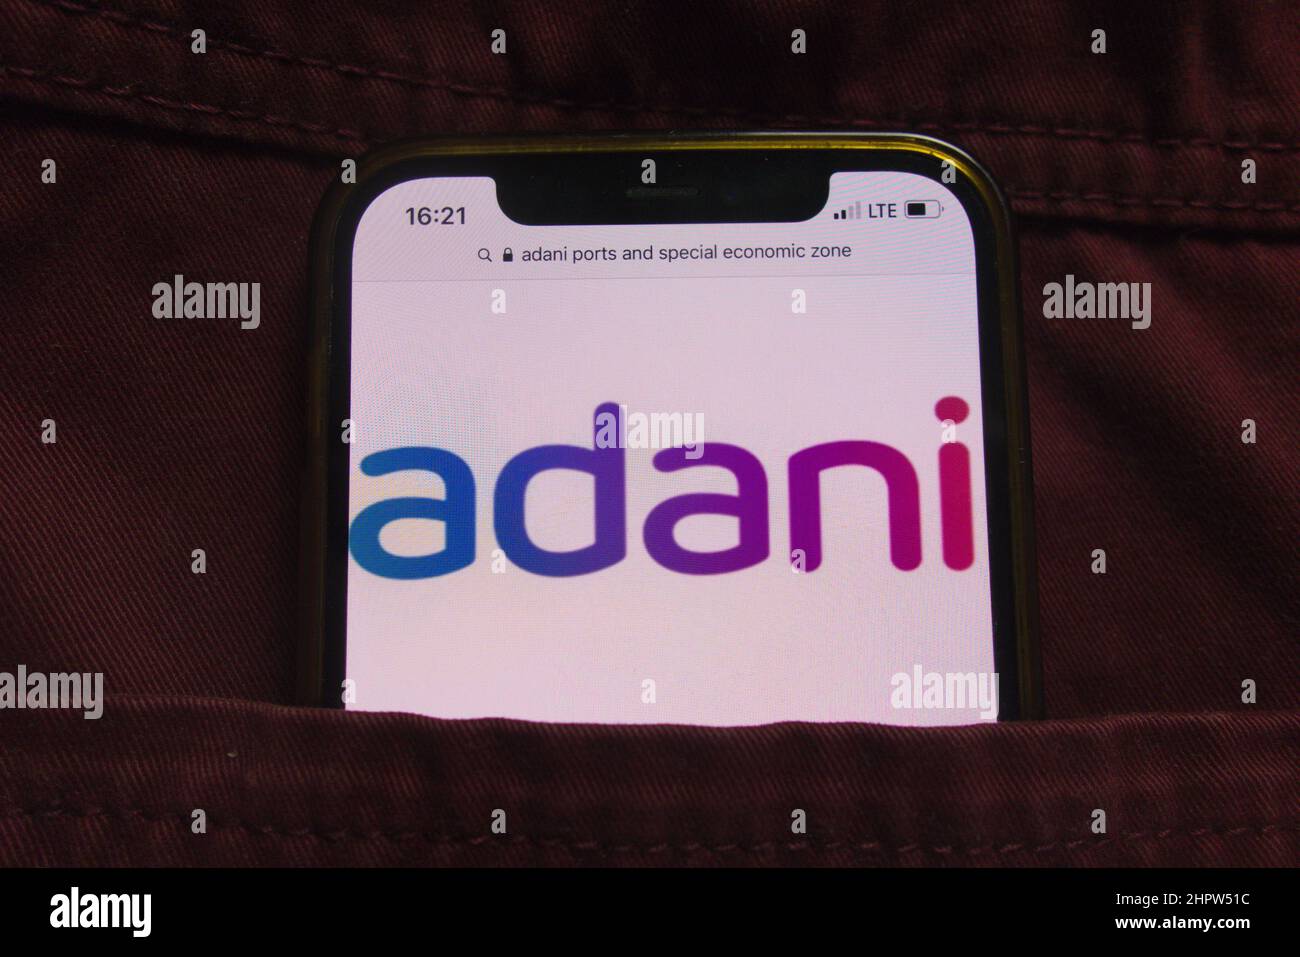 KONSKIE, POLAND - February 22, 2022: Adani Ports and Special Economic Zone Limited company logo displayed on mobile phone hidden in jeans pocket Stock Photo